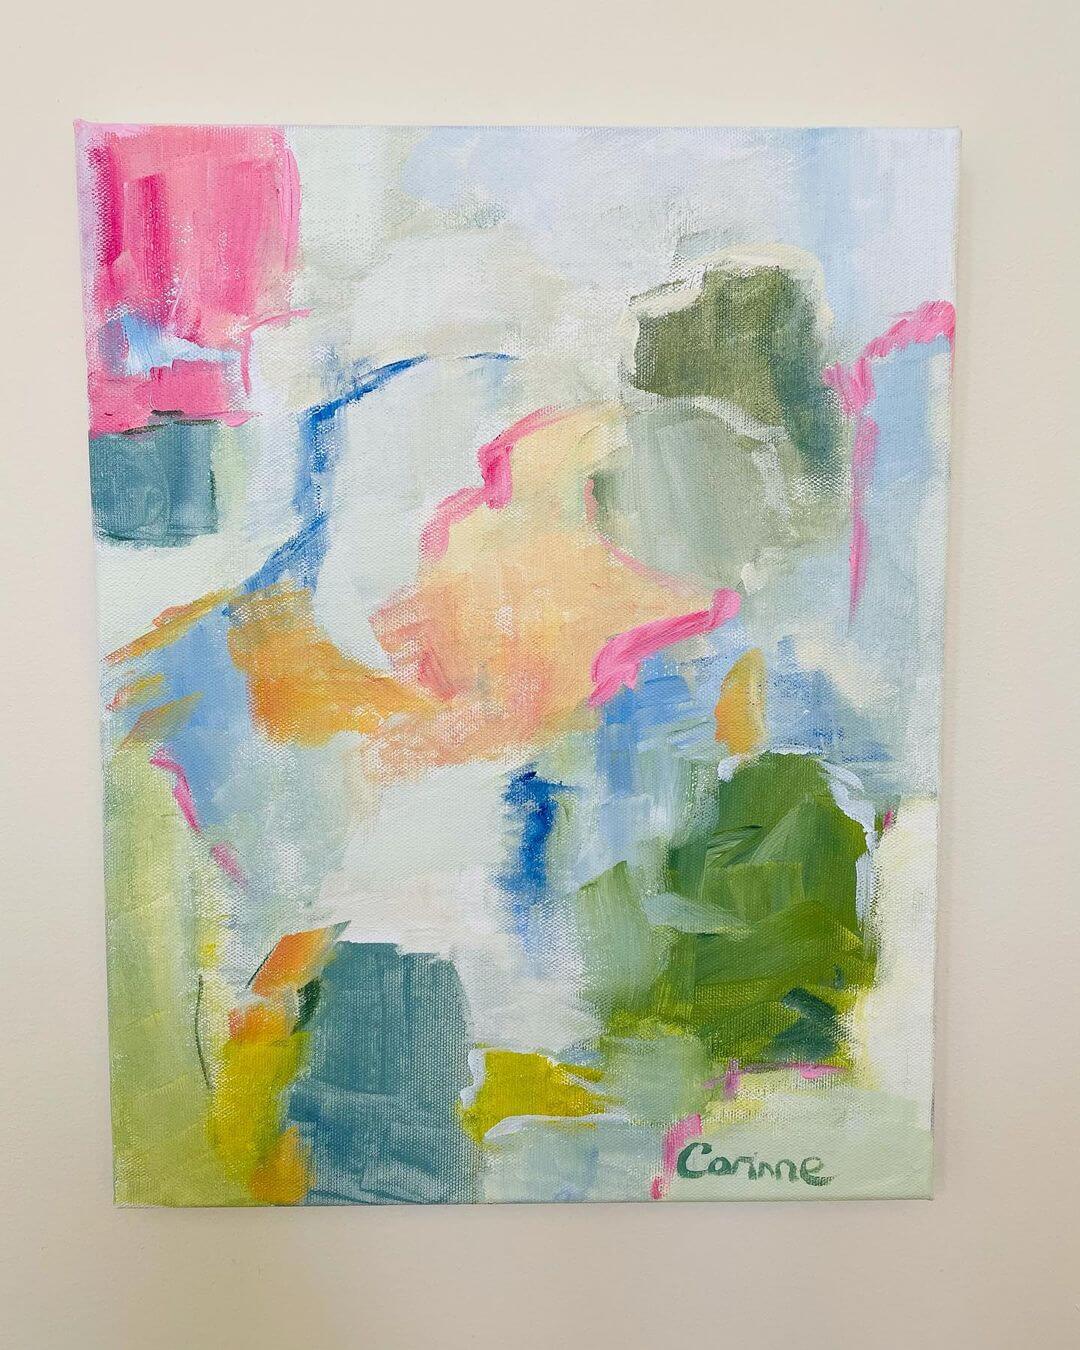 A colourful abstract painting with green, blue and pinks.